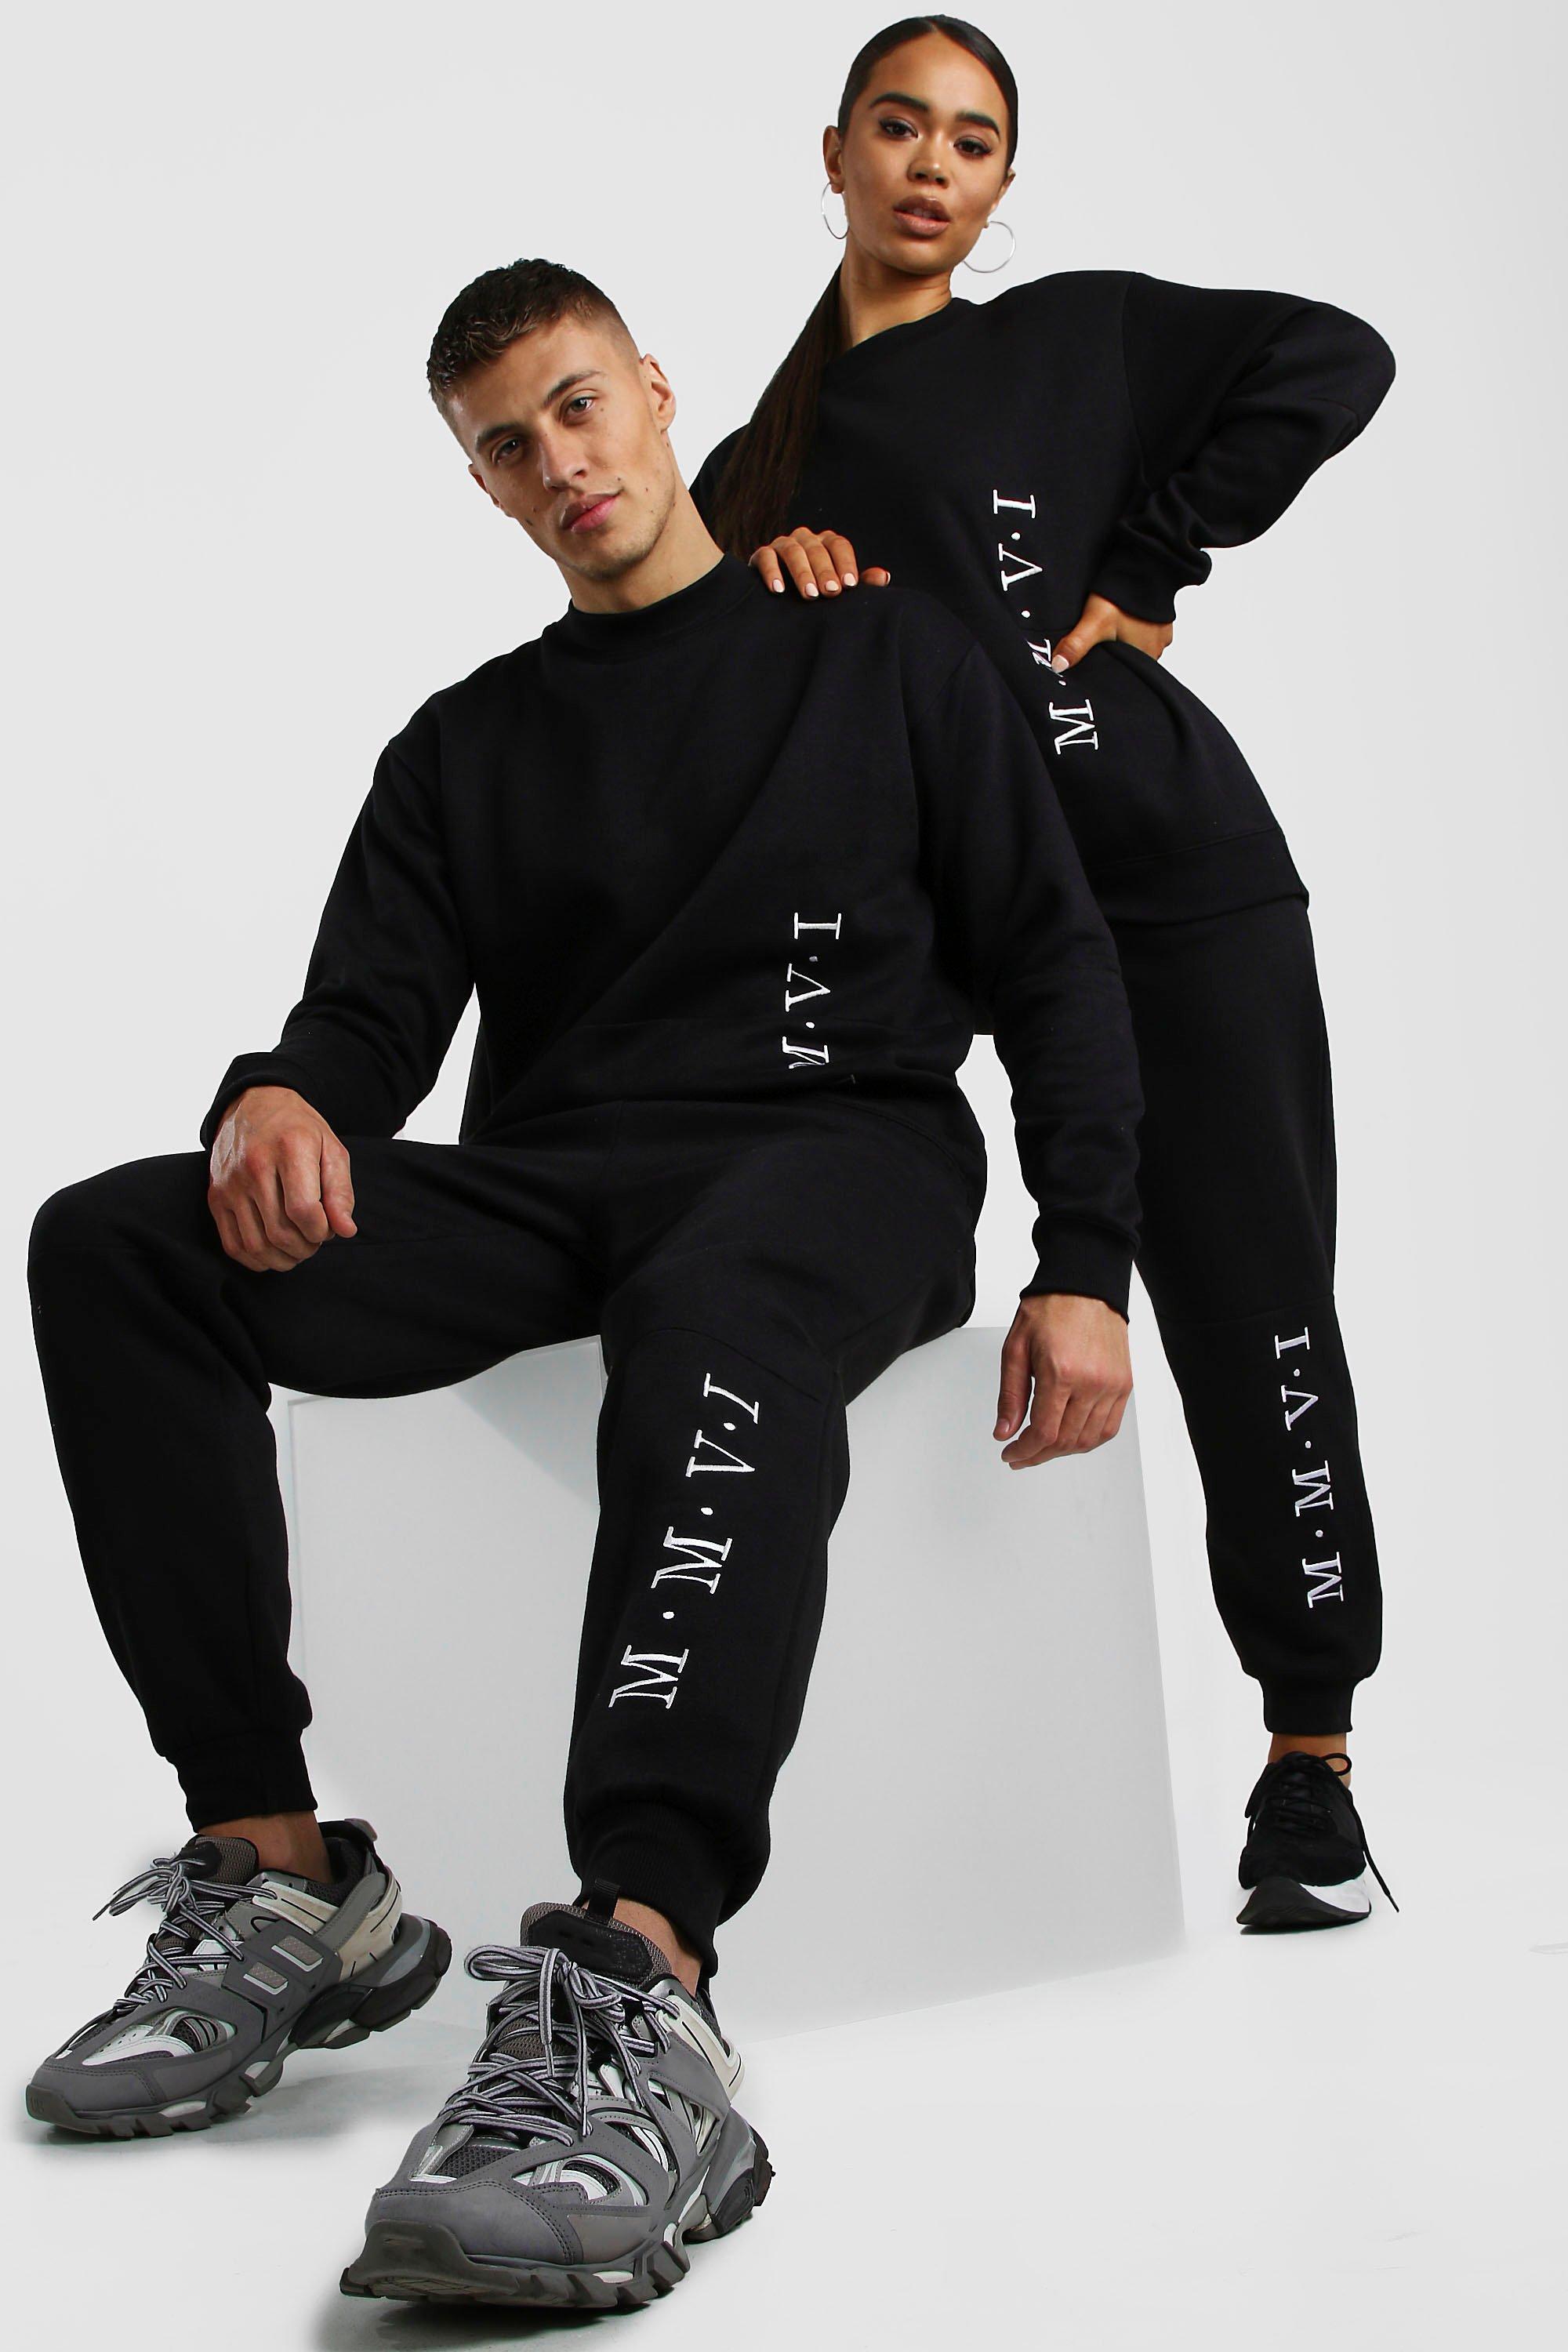 boohoo his and hers tracksuits